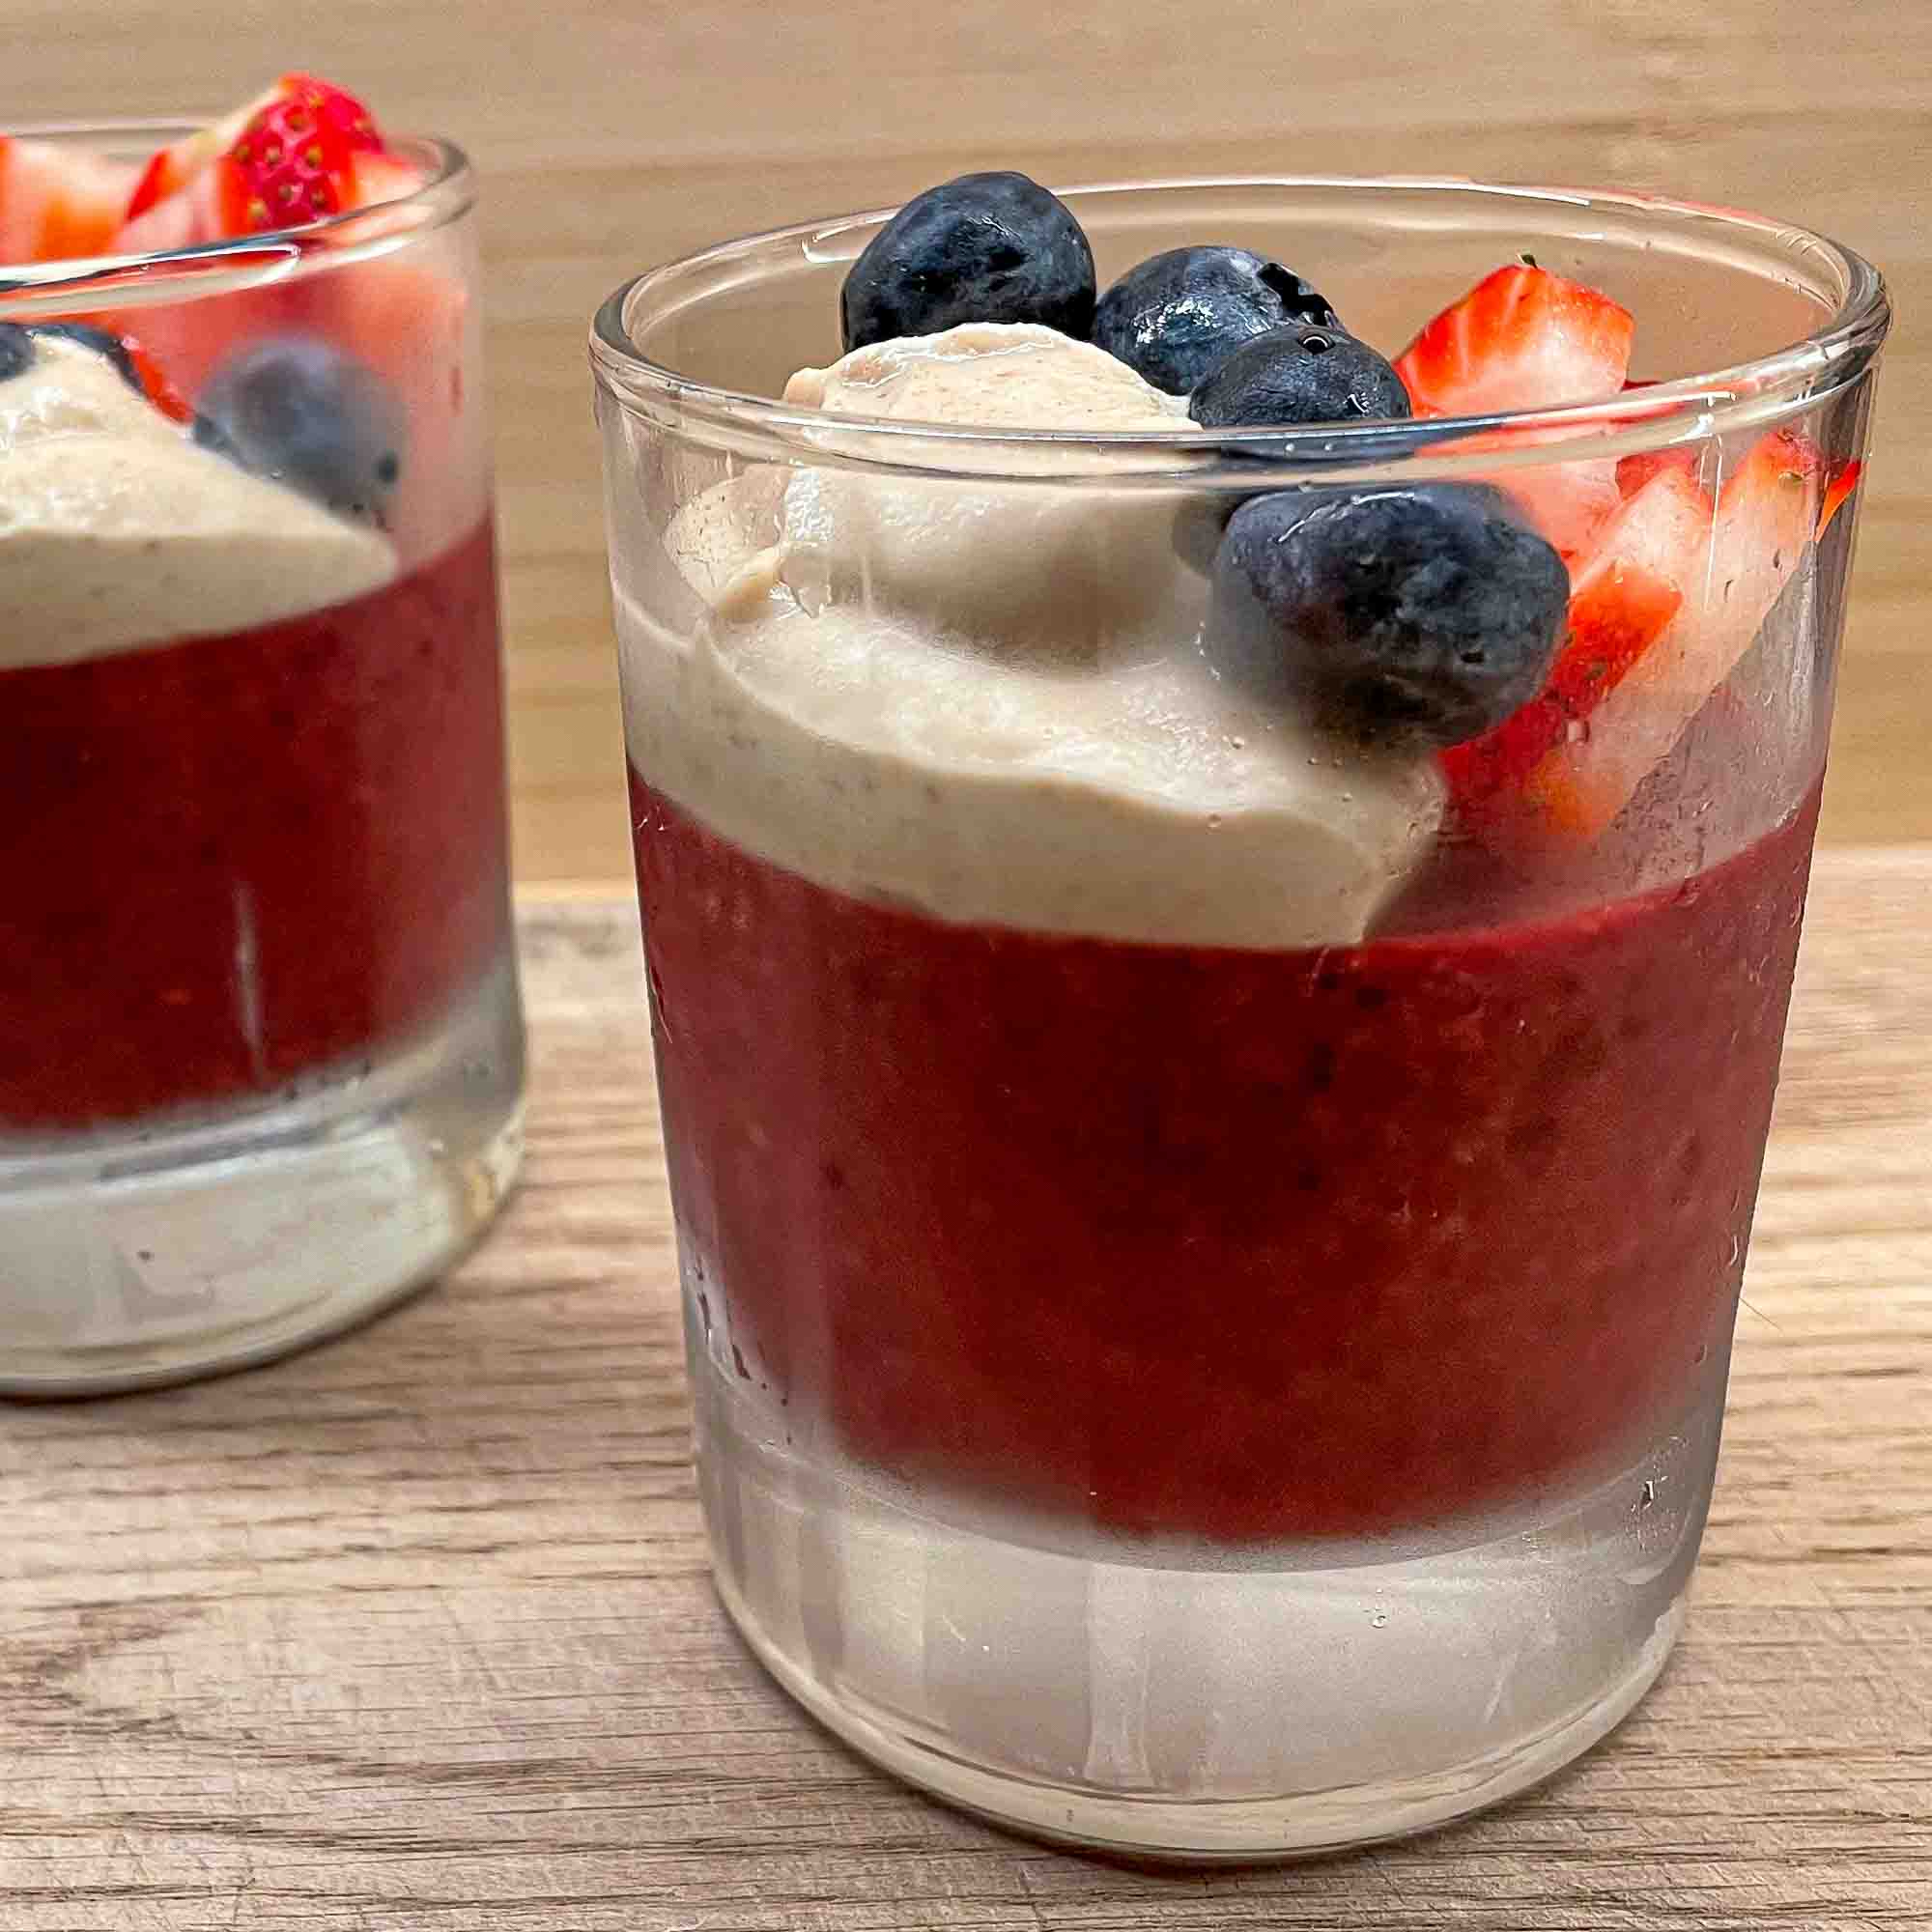 alt="an individual portion of berry pudding with some strawberry slices, blueberries, and a dollop of rich cashew cream on top."